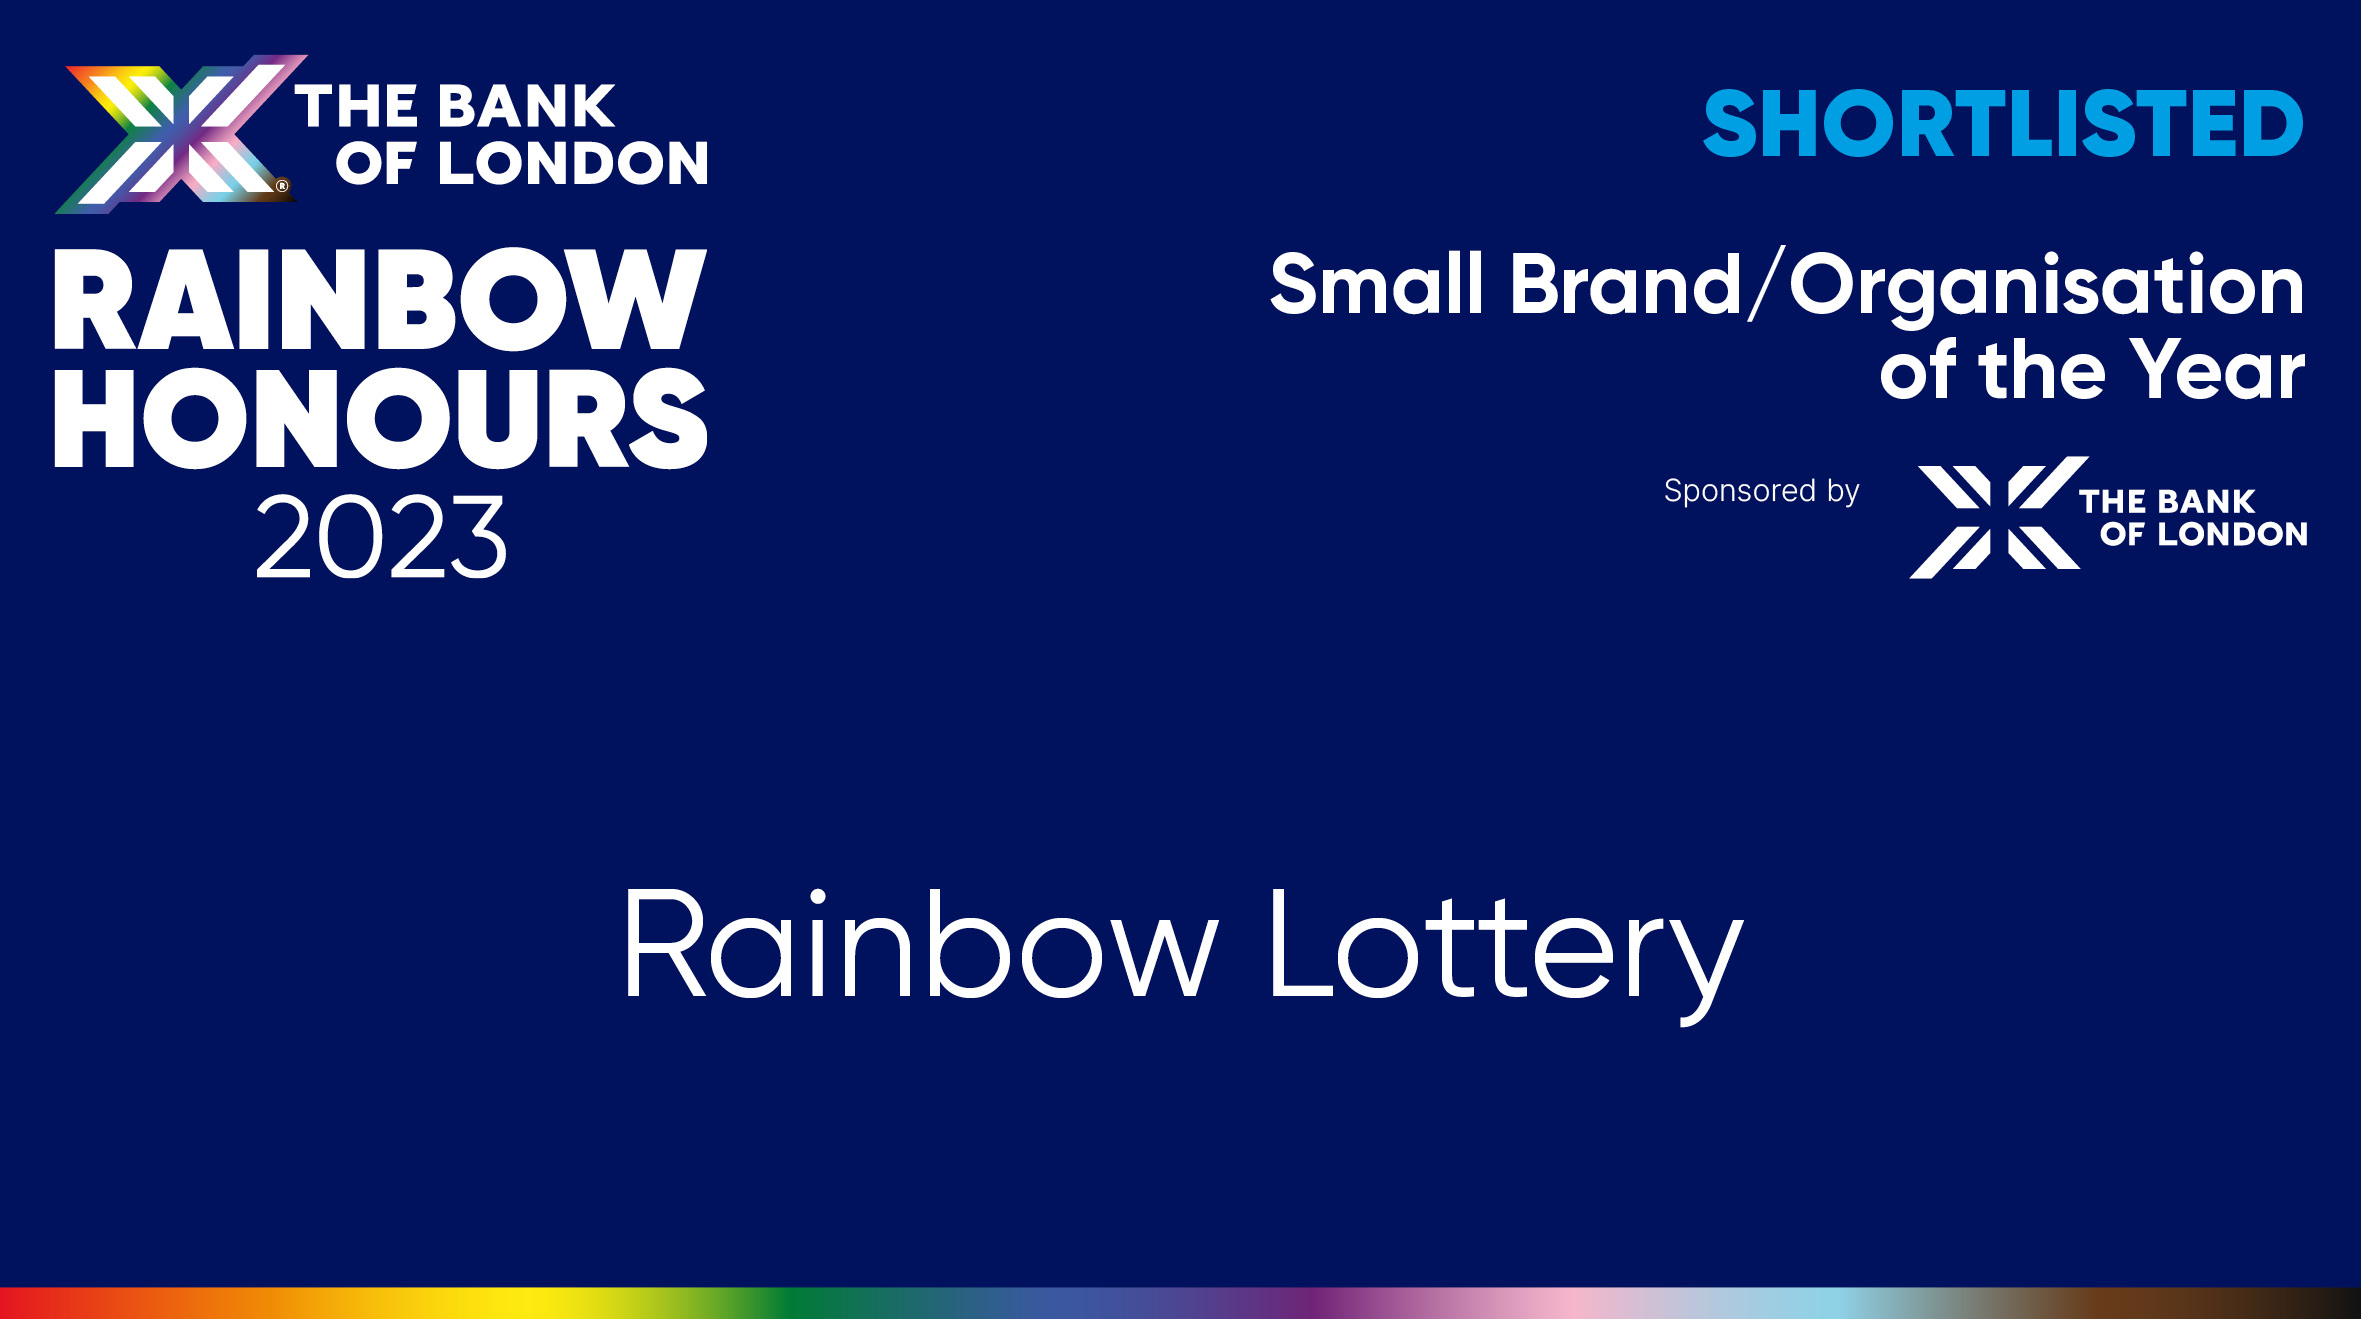 Rainbow Honours shortlist category for 2023